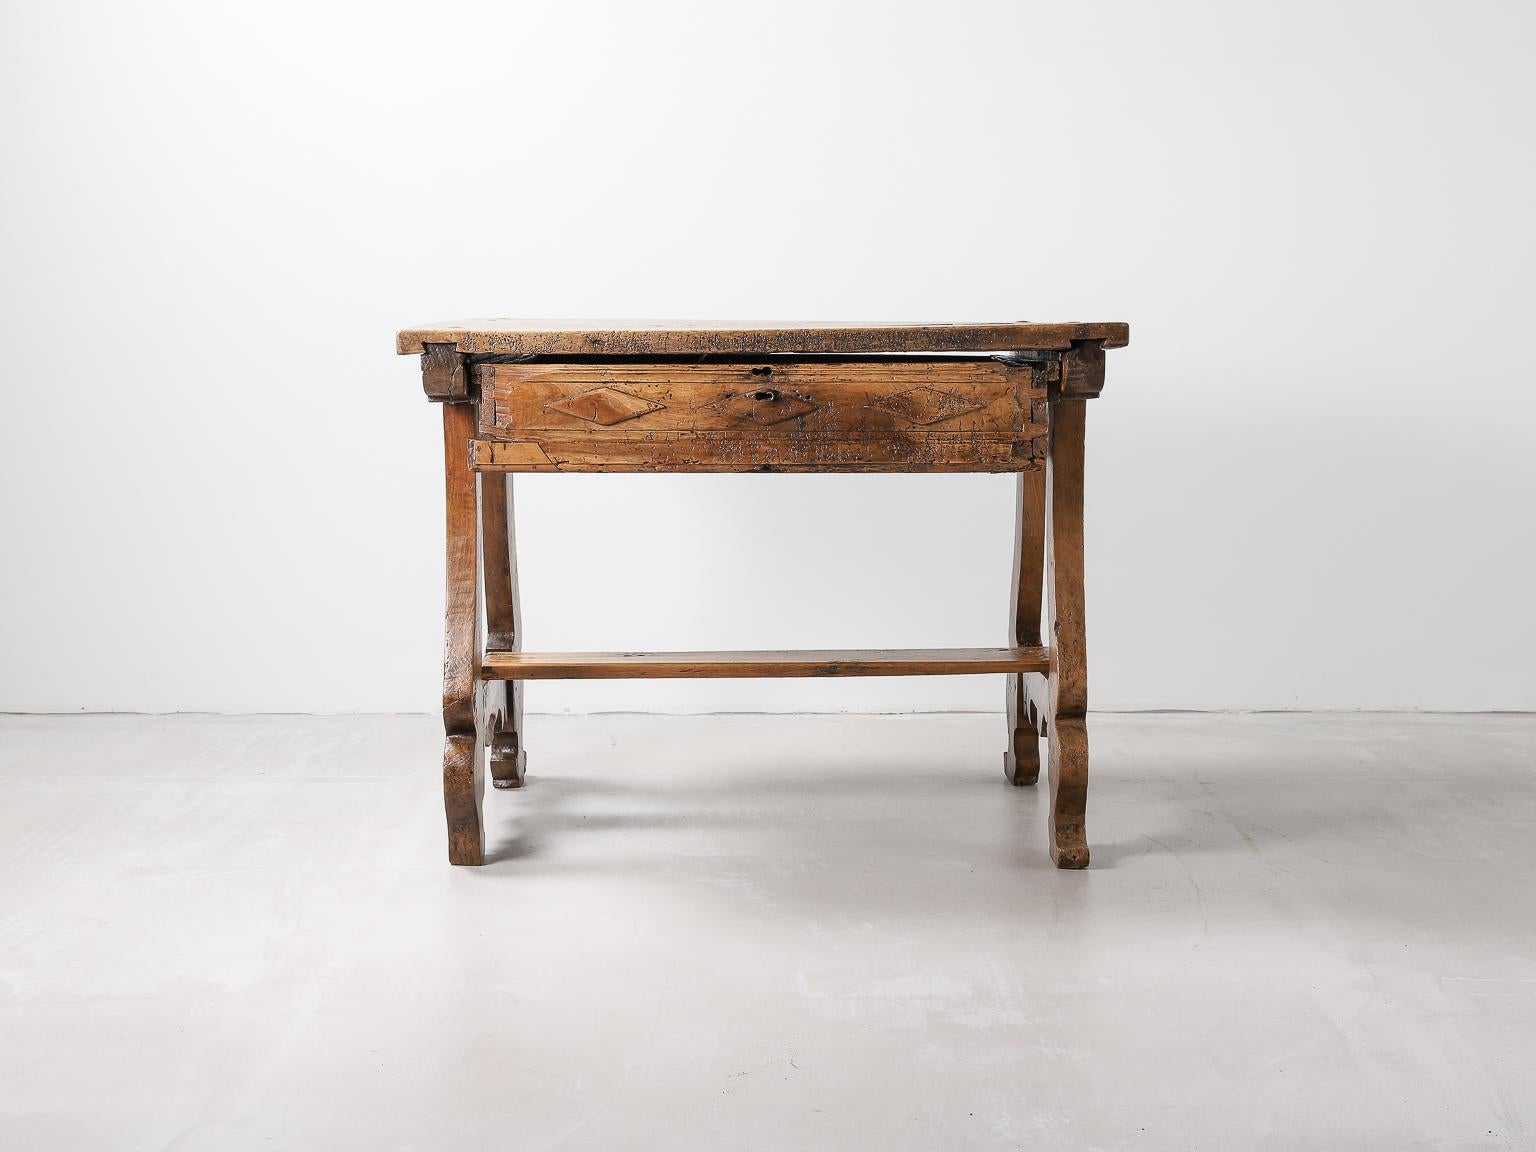 17th century Spanish Baroque walnut writing desk with iron details. 

The tabletop is two walnut boards with iron work detailing. The rest of the body consists of lyre shaped legs and a central support across the legs which will most likely have